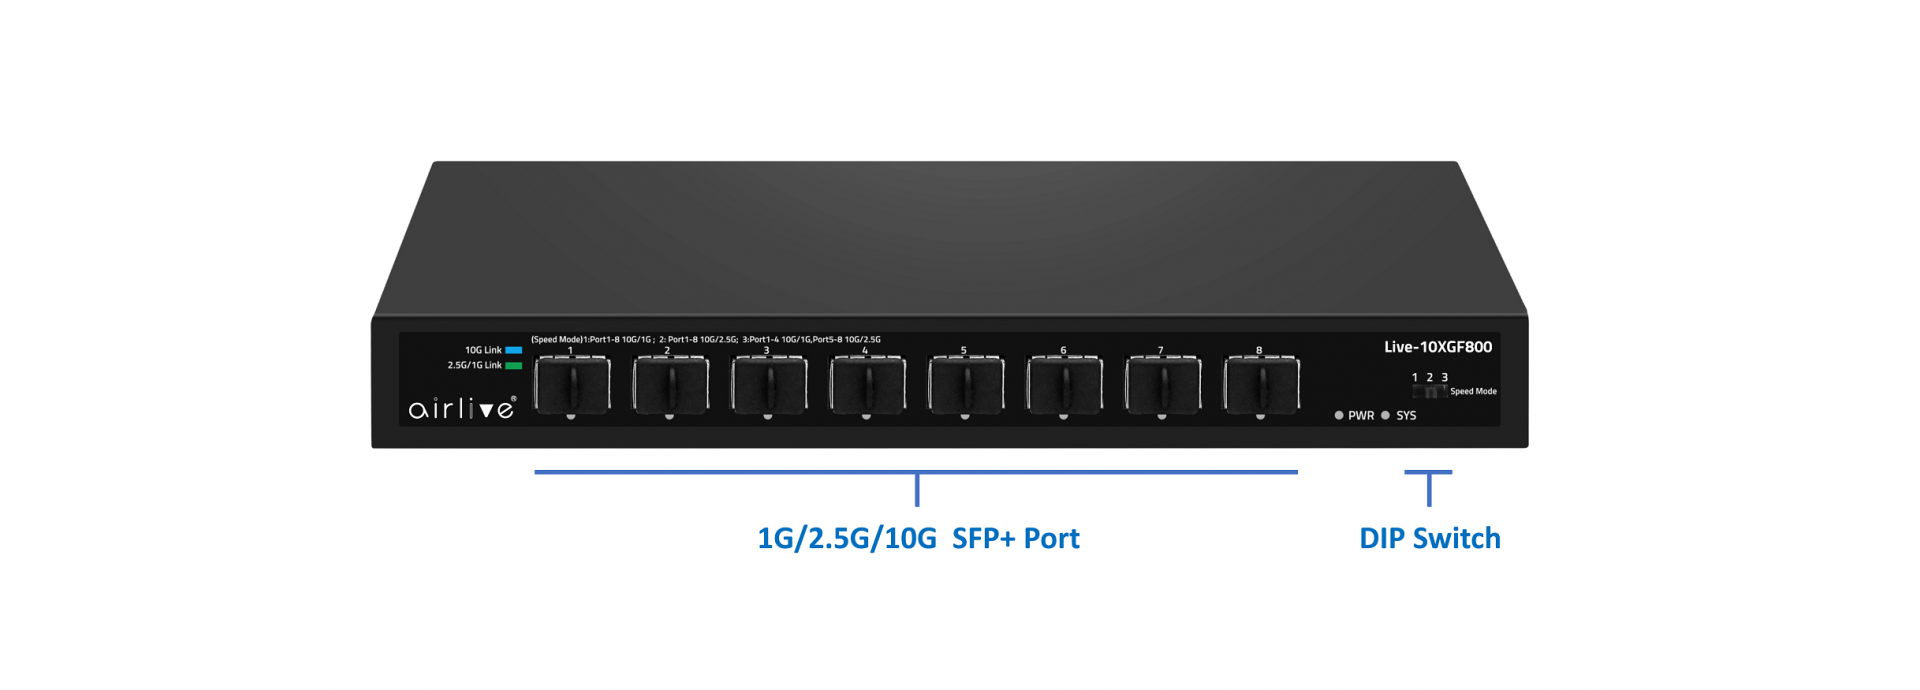 Upgrading your system to 10Gbps SFP+